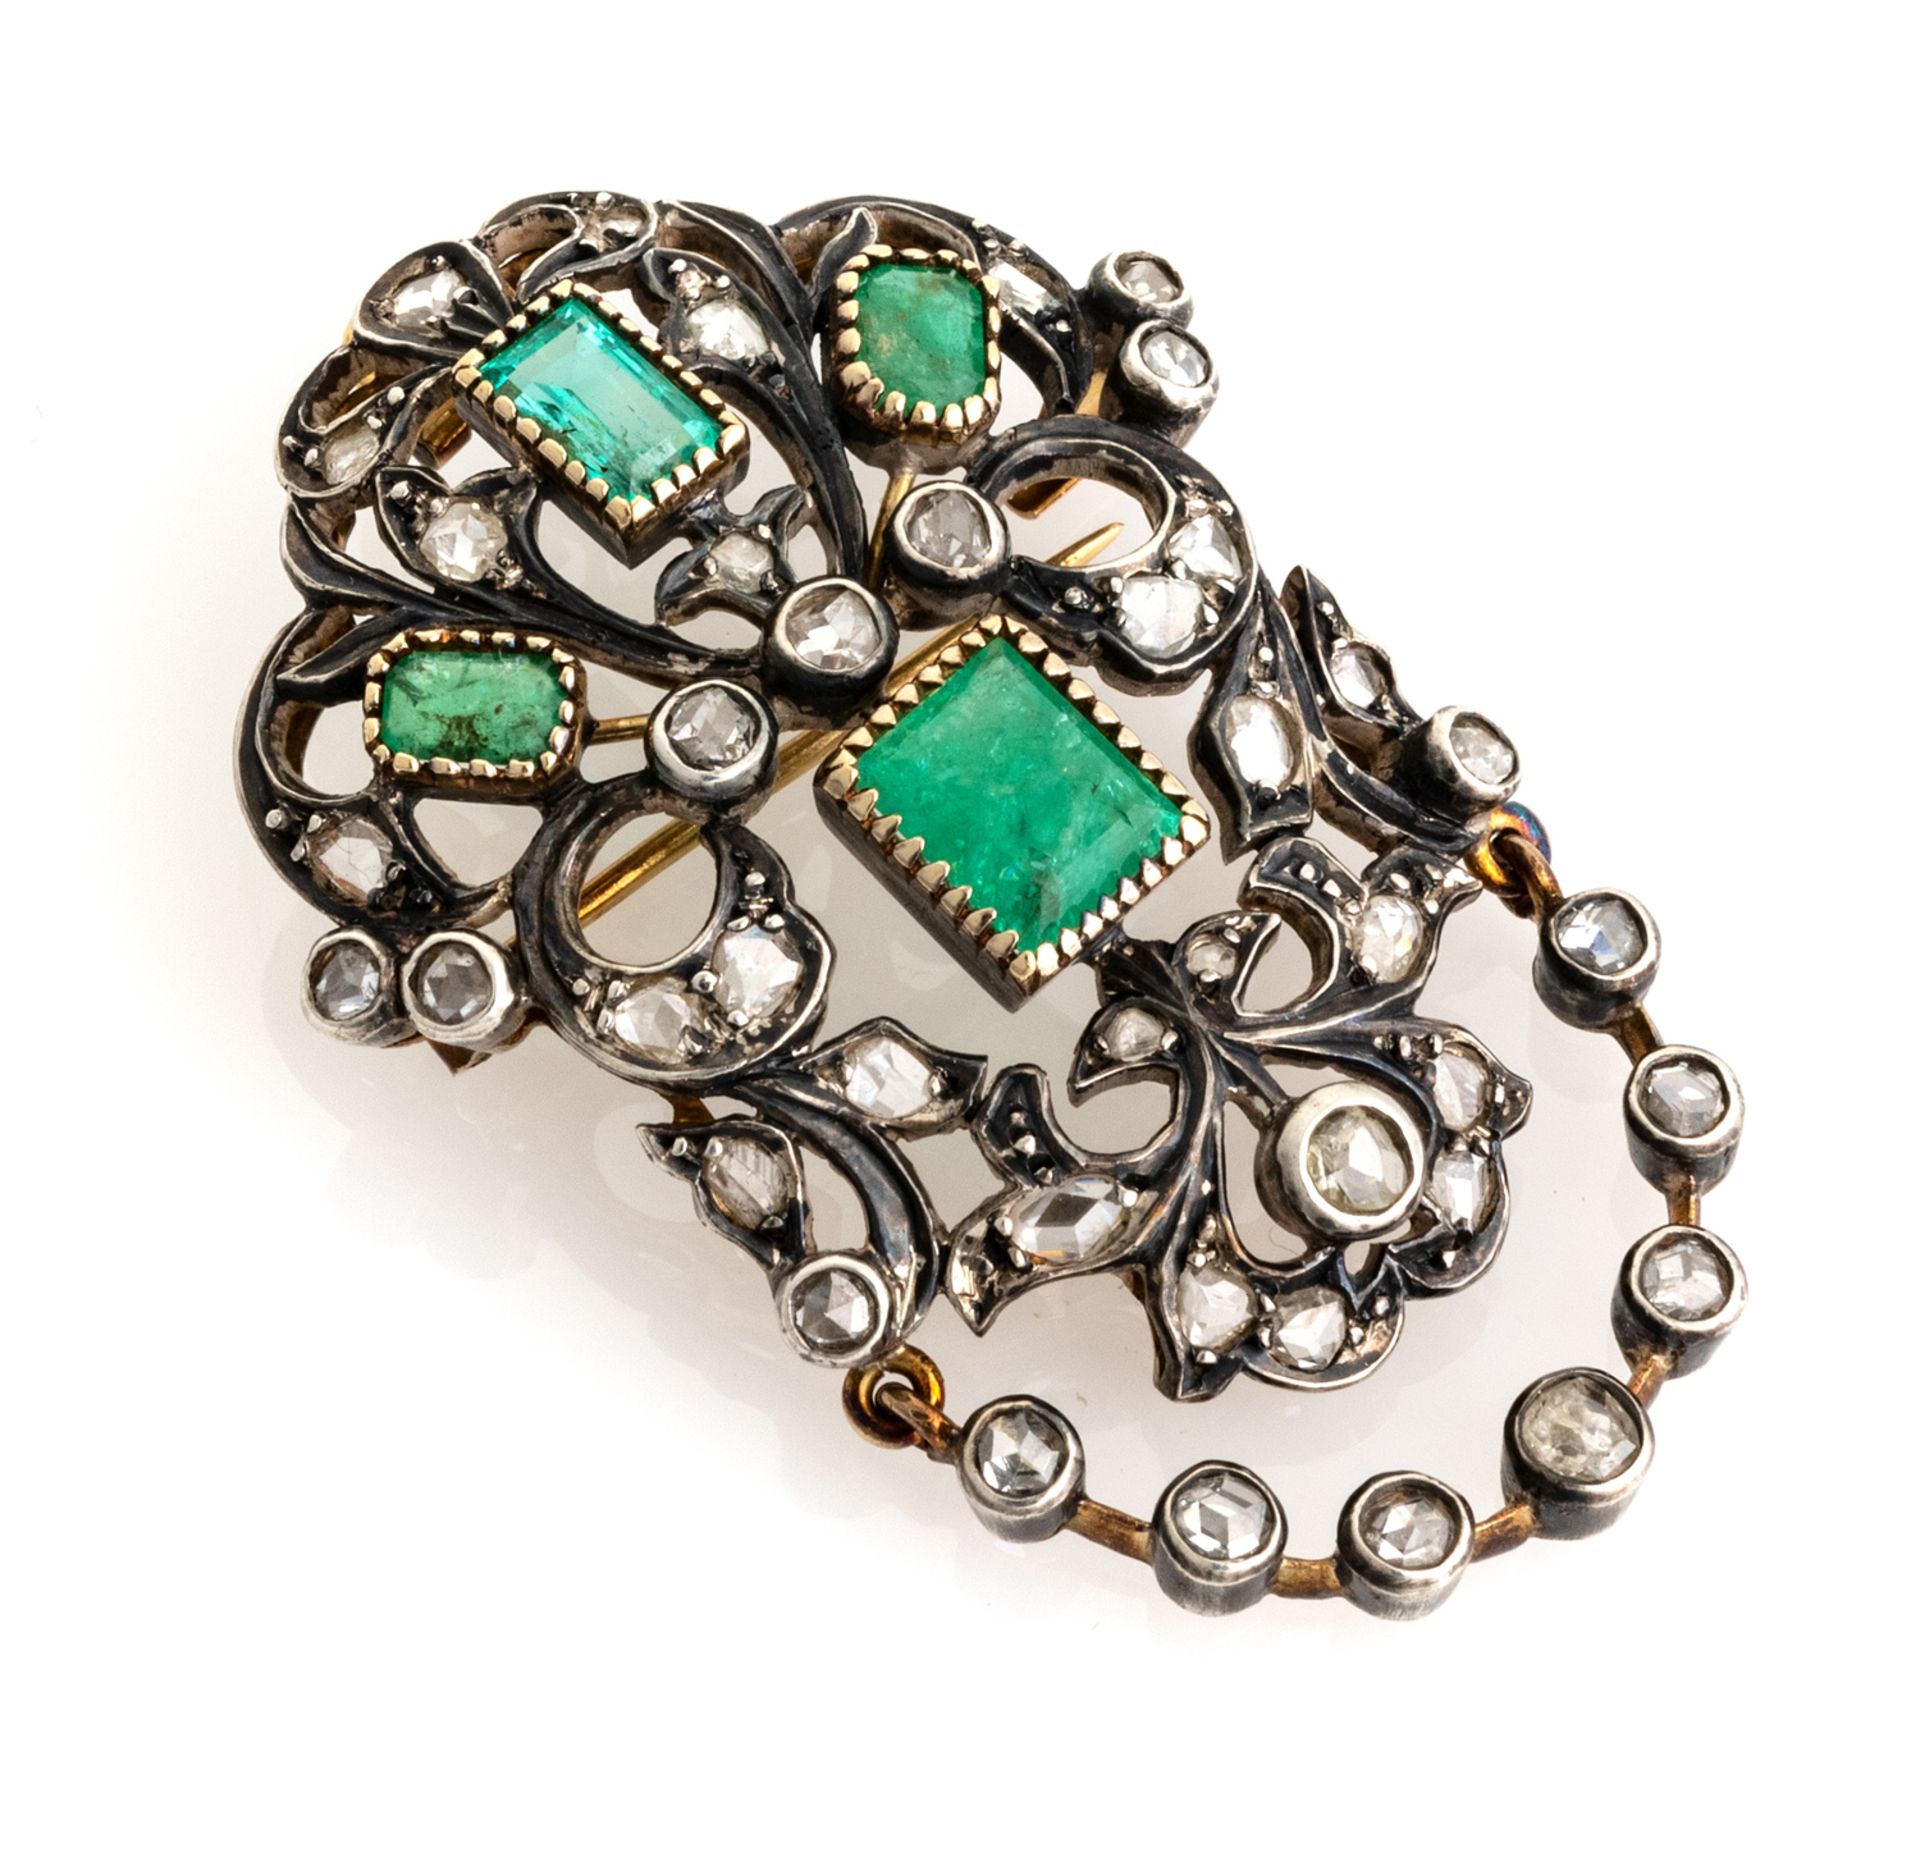 BEAUTIFUL GOLD AND SILVER TREMBLANT BROOCH